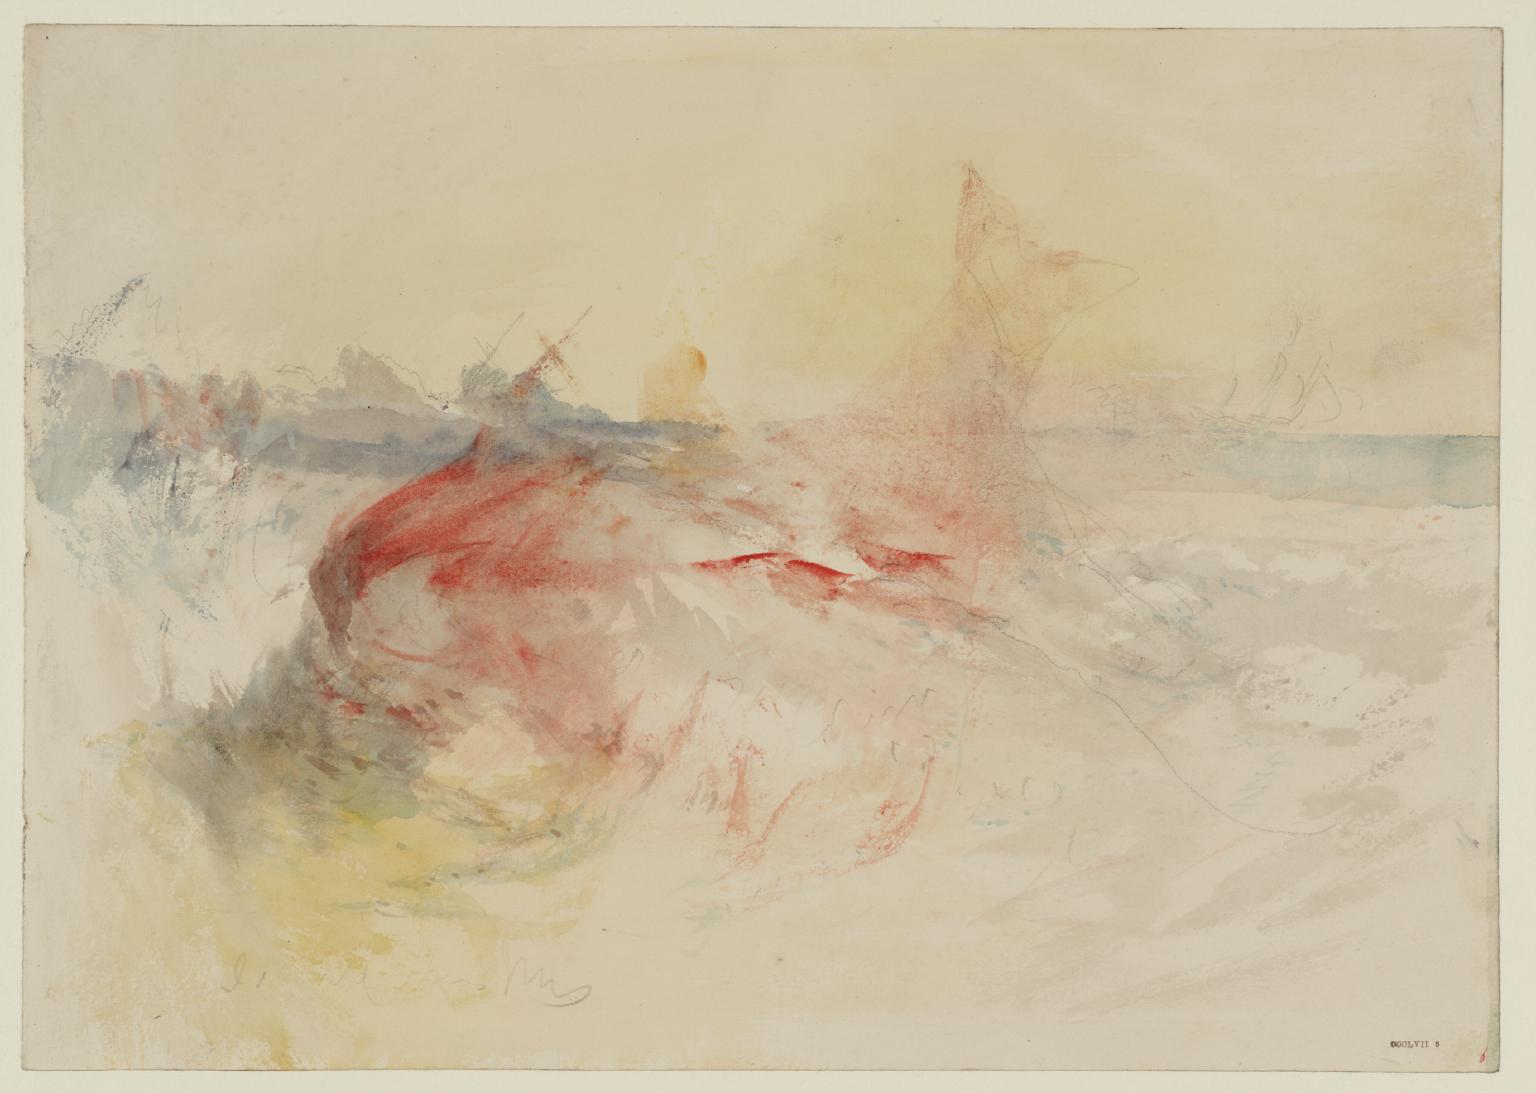 A harpooned whale (c. 1845) by JMW Turner